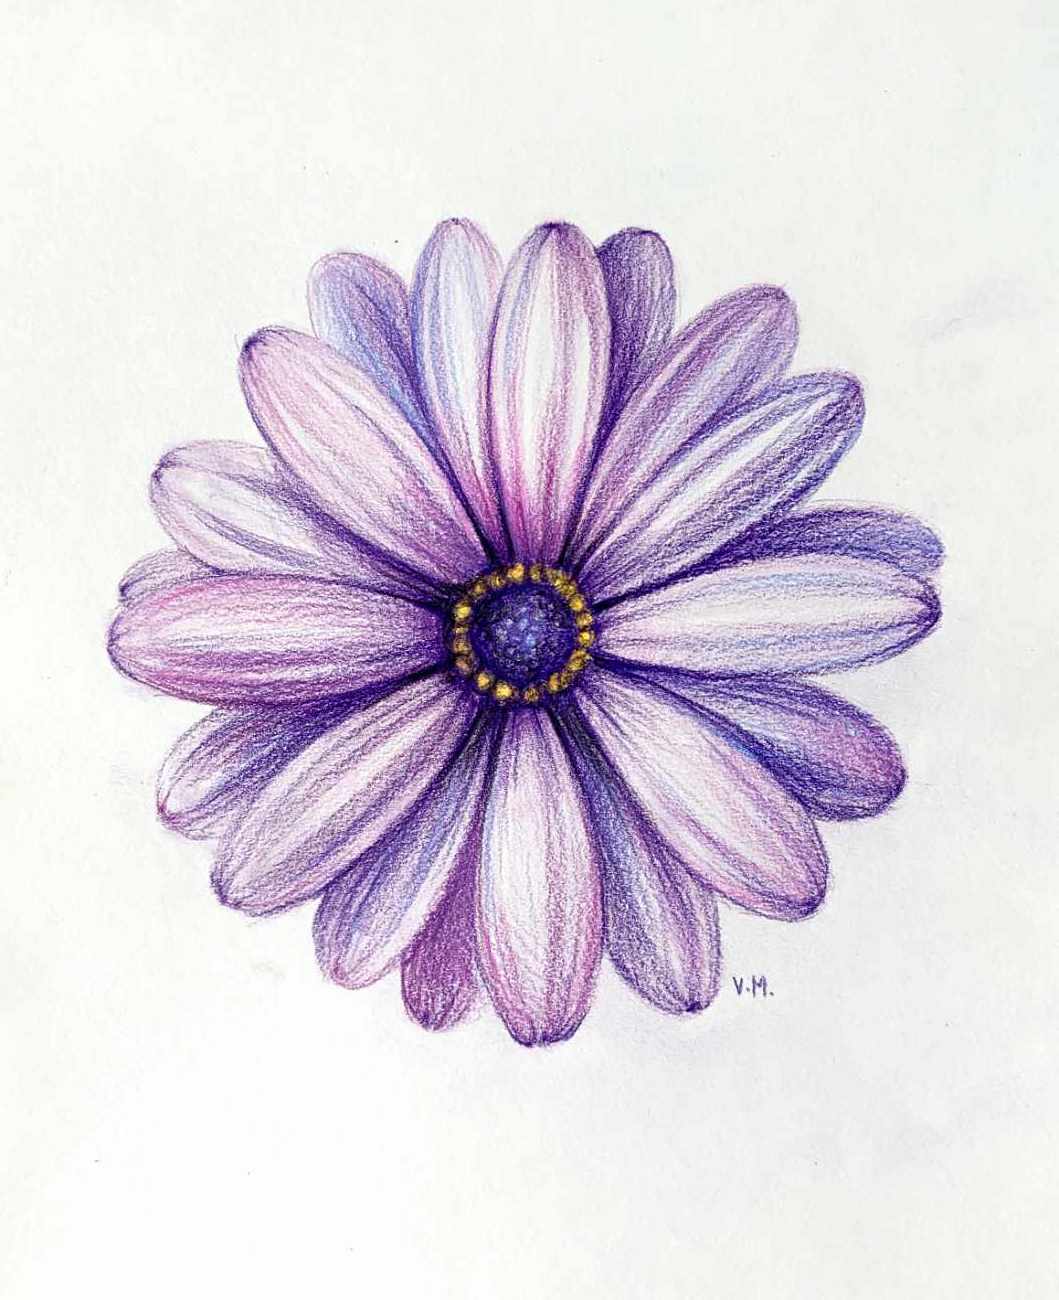 Daisy Pencil Drawing, Printable Daisy Pencil Drawing, Daisy Flower Wall  Art, Daisy Flower, Botanical Wall Art 3384 INSTANT DOWNLOAD - Etsy